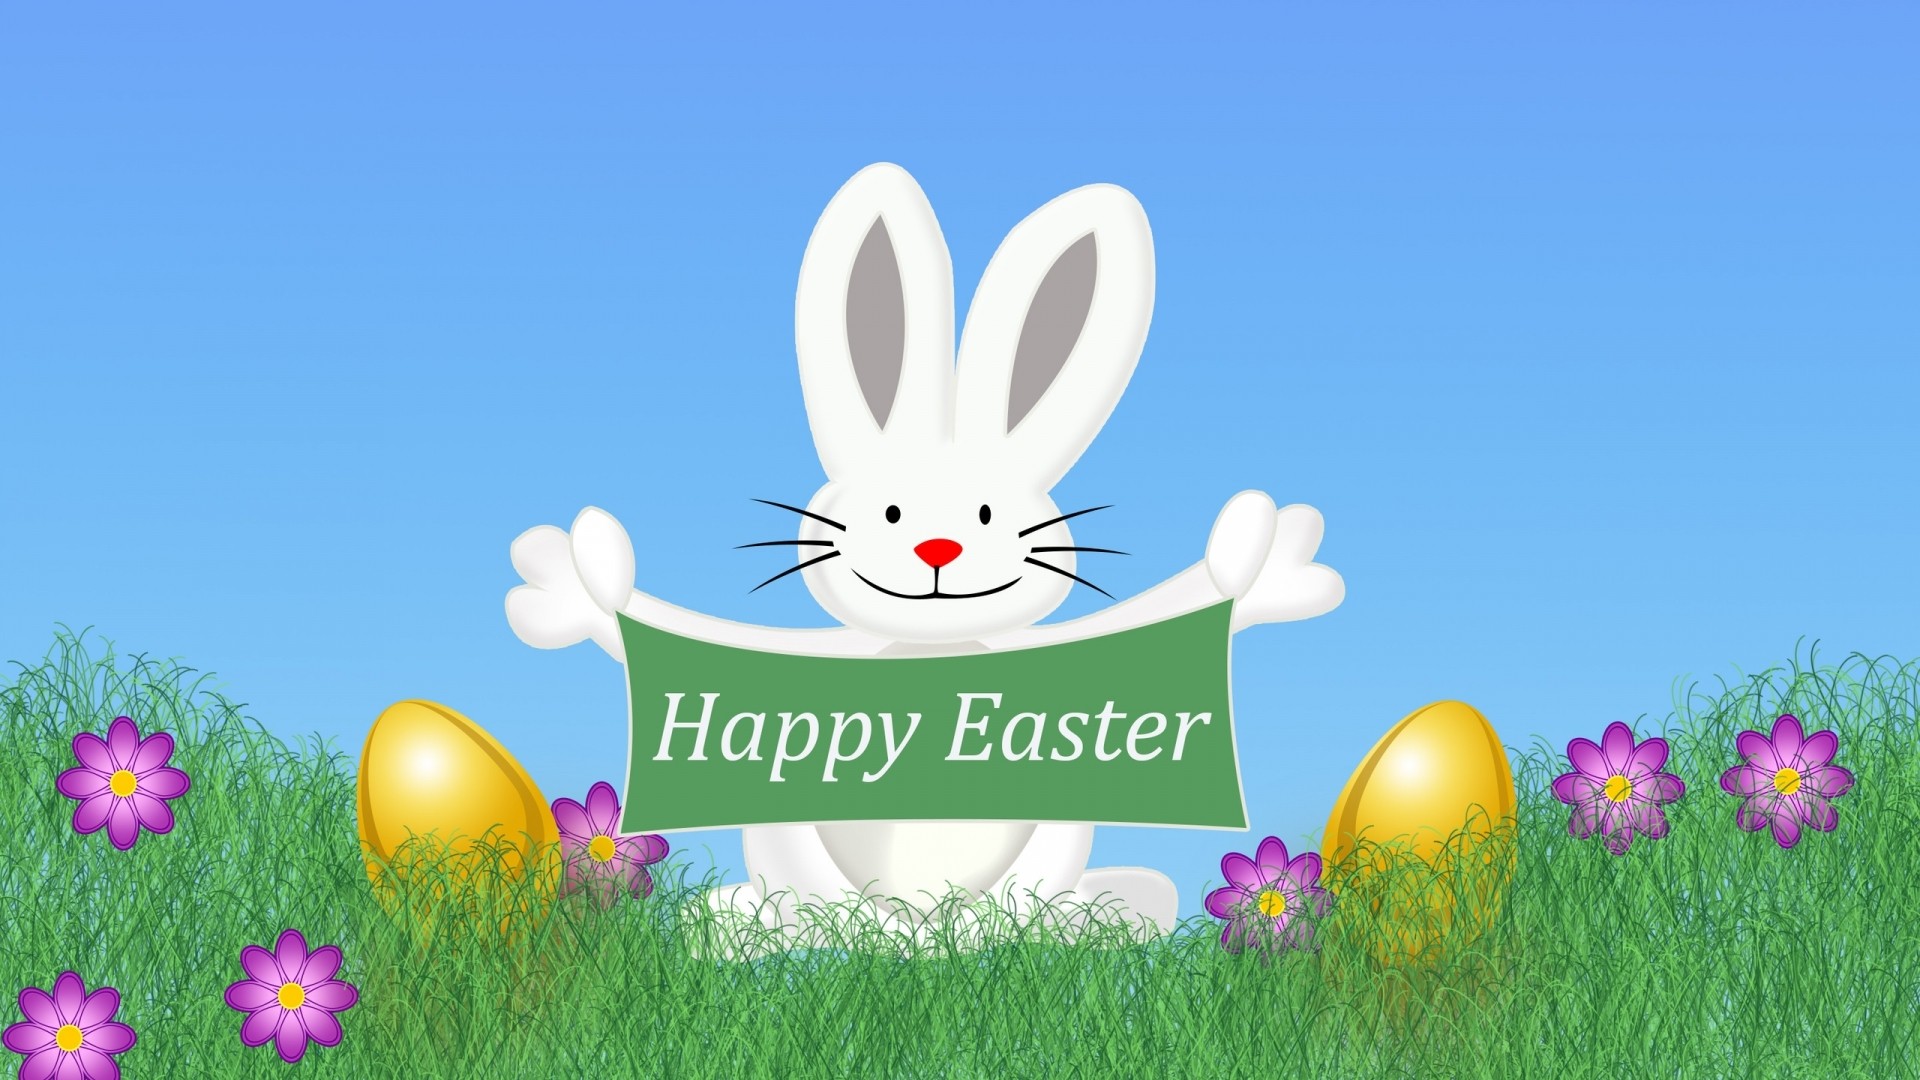 Happy Easter Image HD